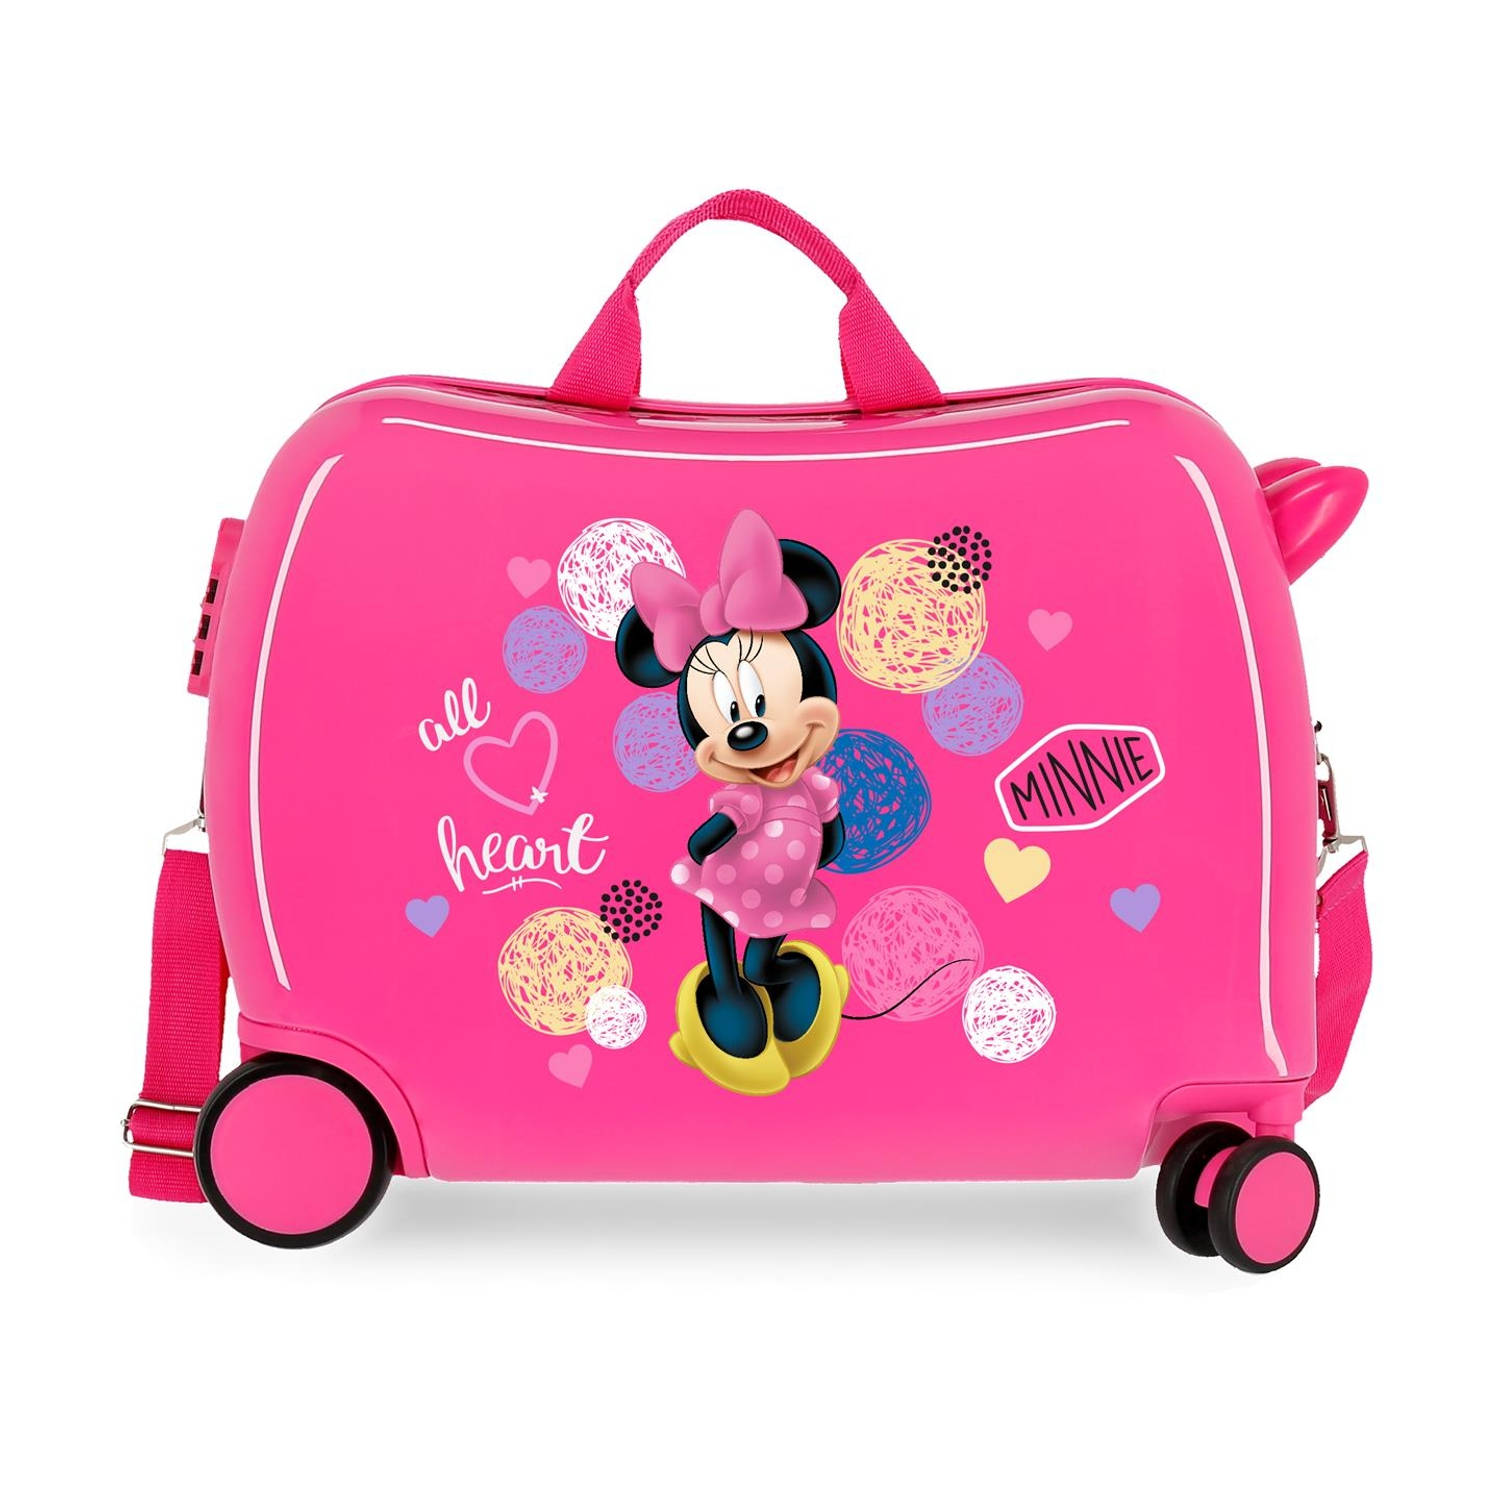 Disney kinderkoffer Minnie Mouse 50 cm ABS 34 liter roze